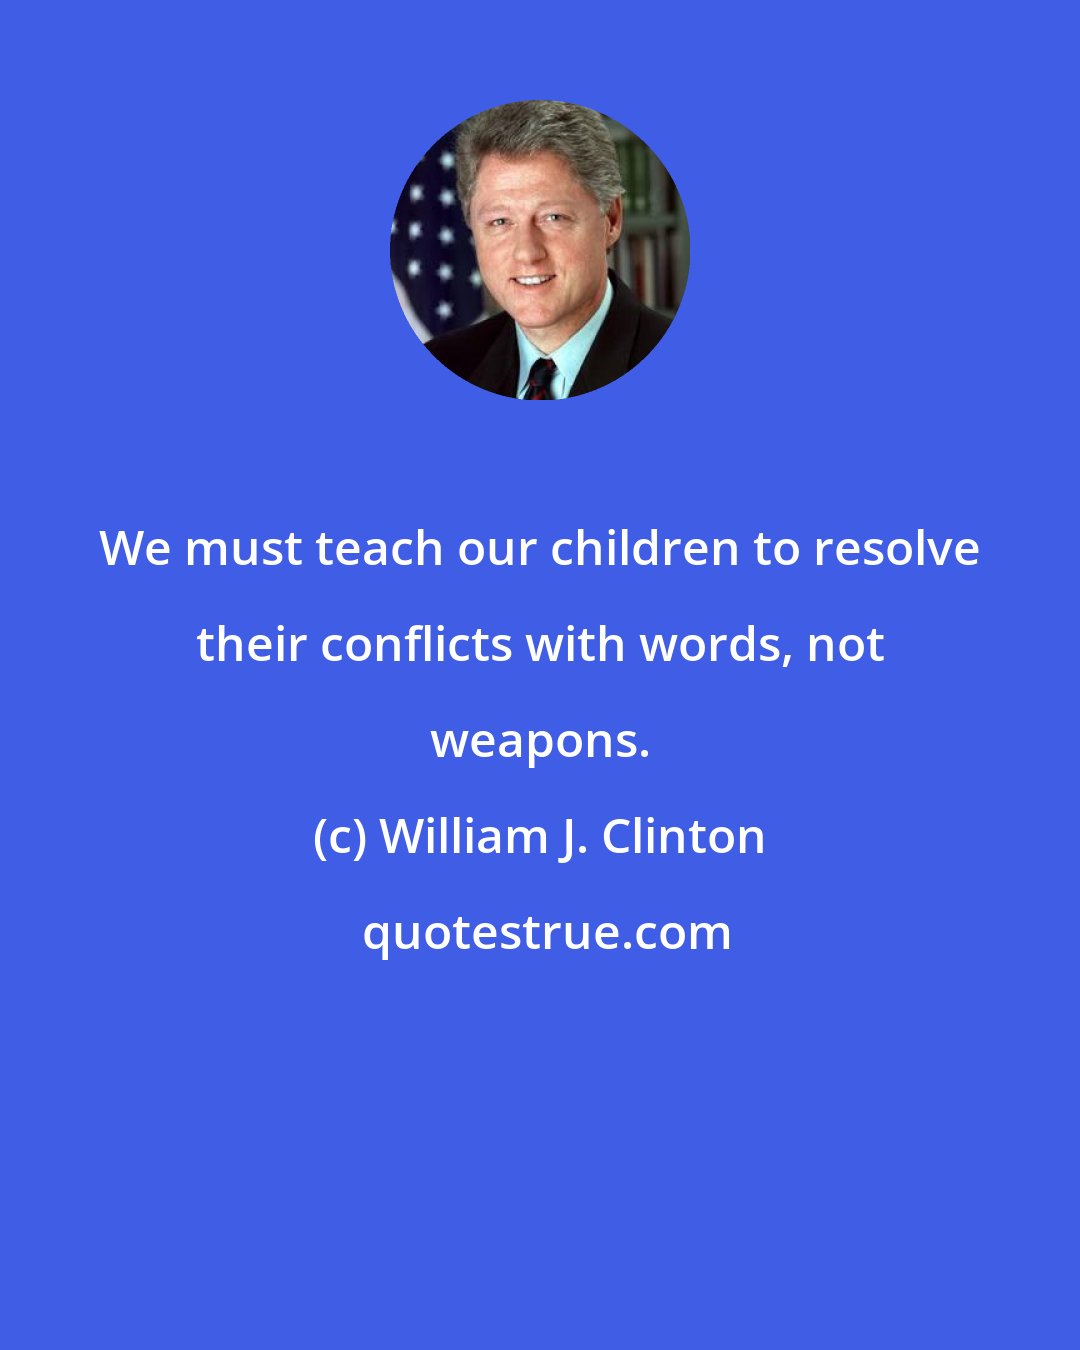 William J. Clinton: We must teach our children to resolve their conflicts with words, not weapons.